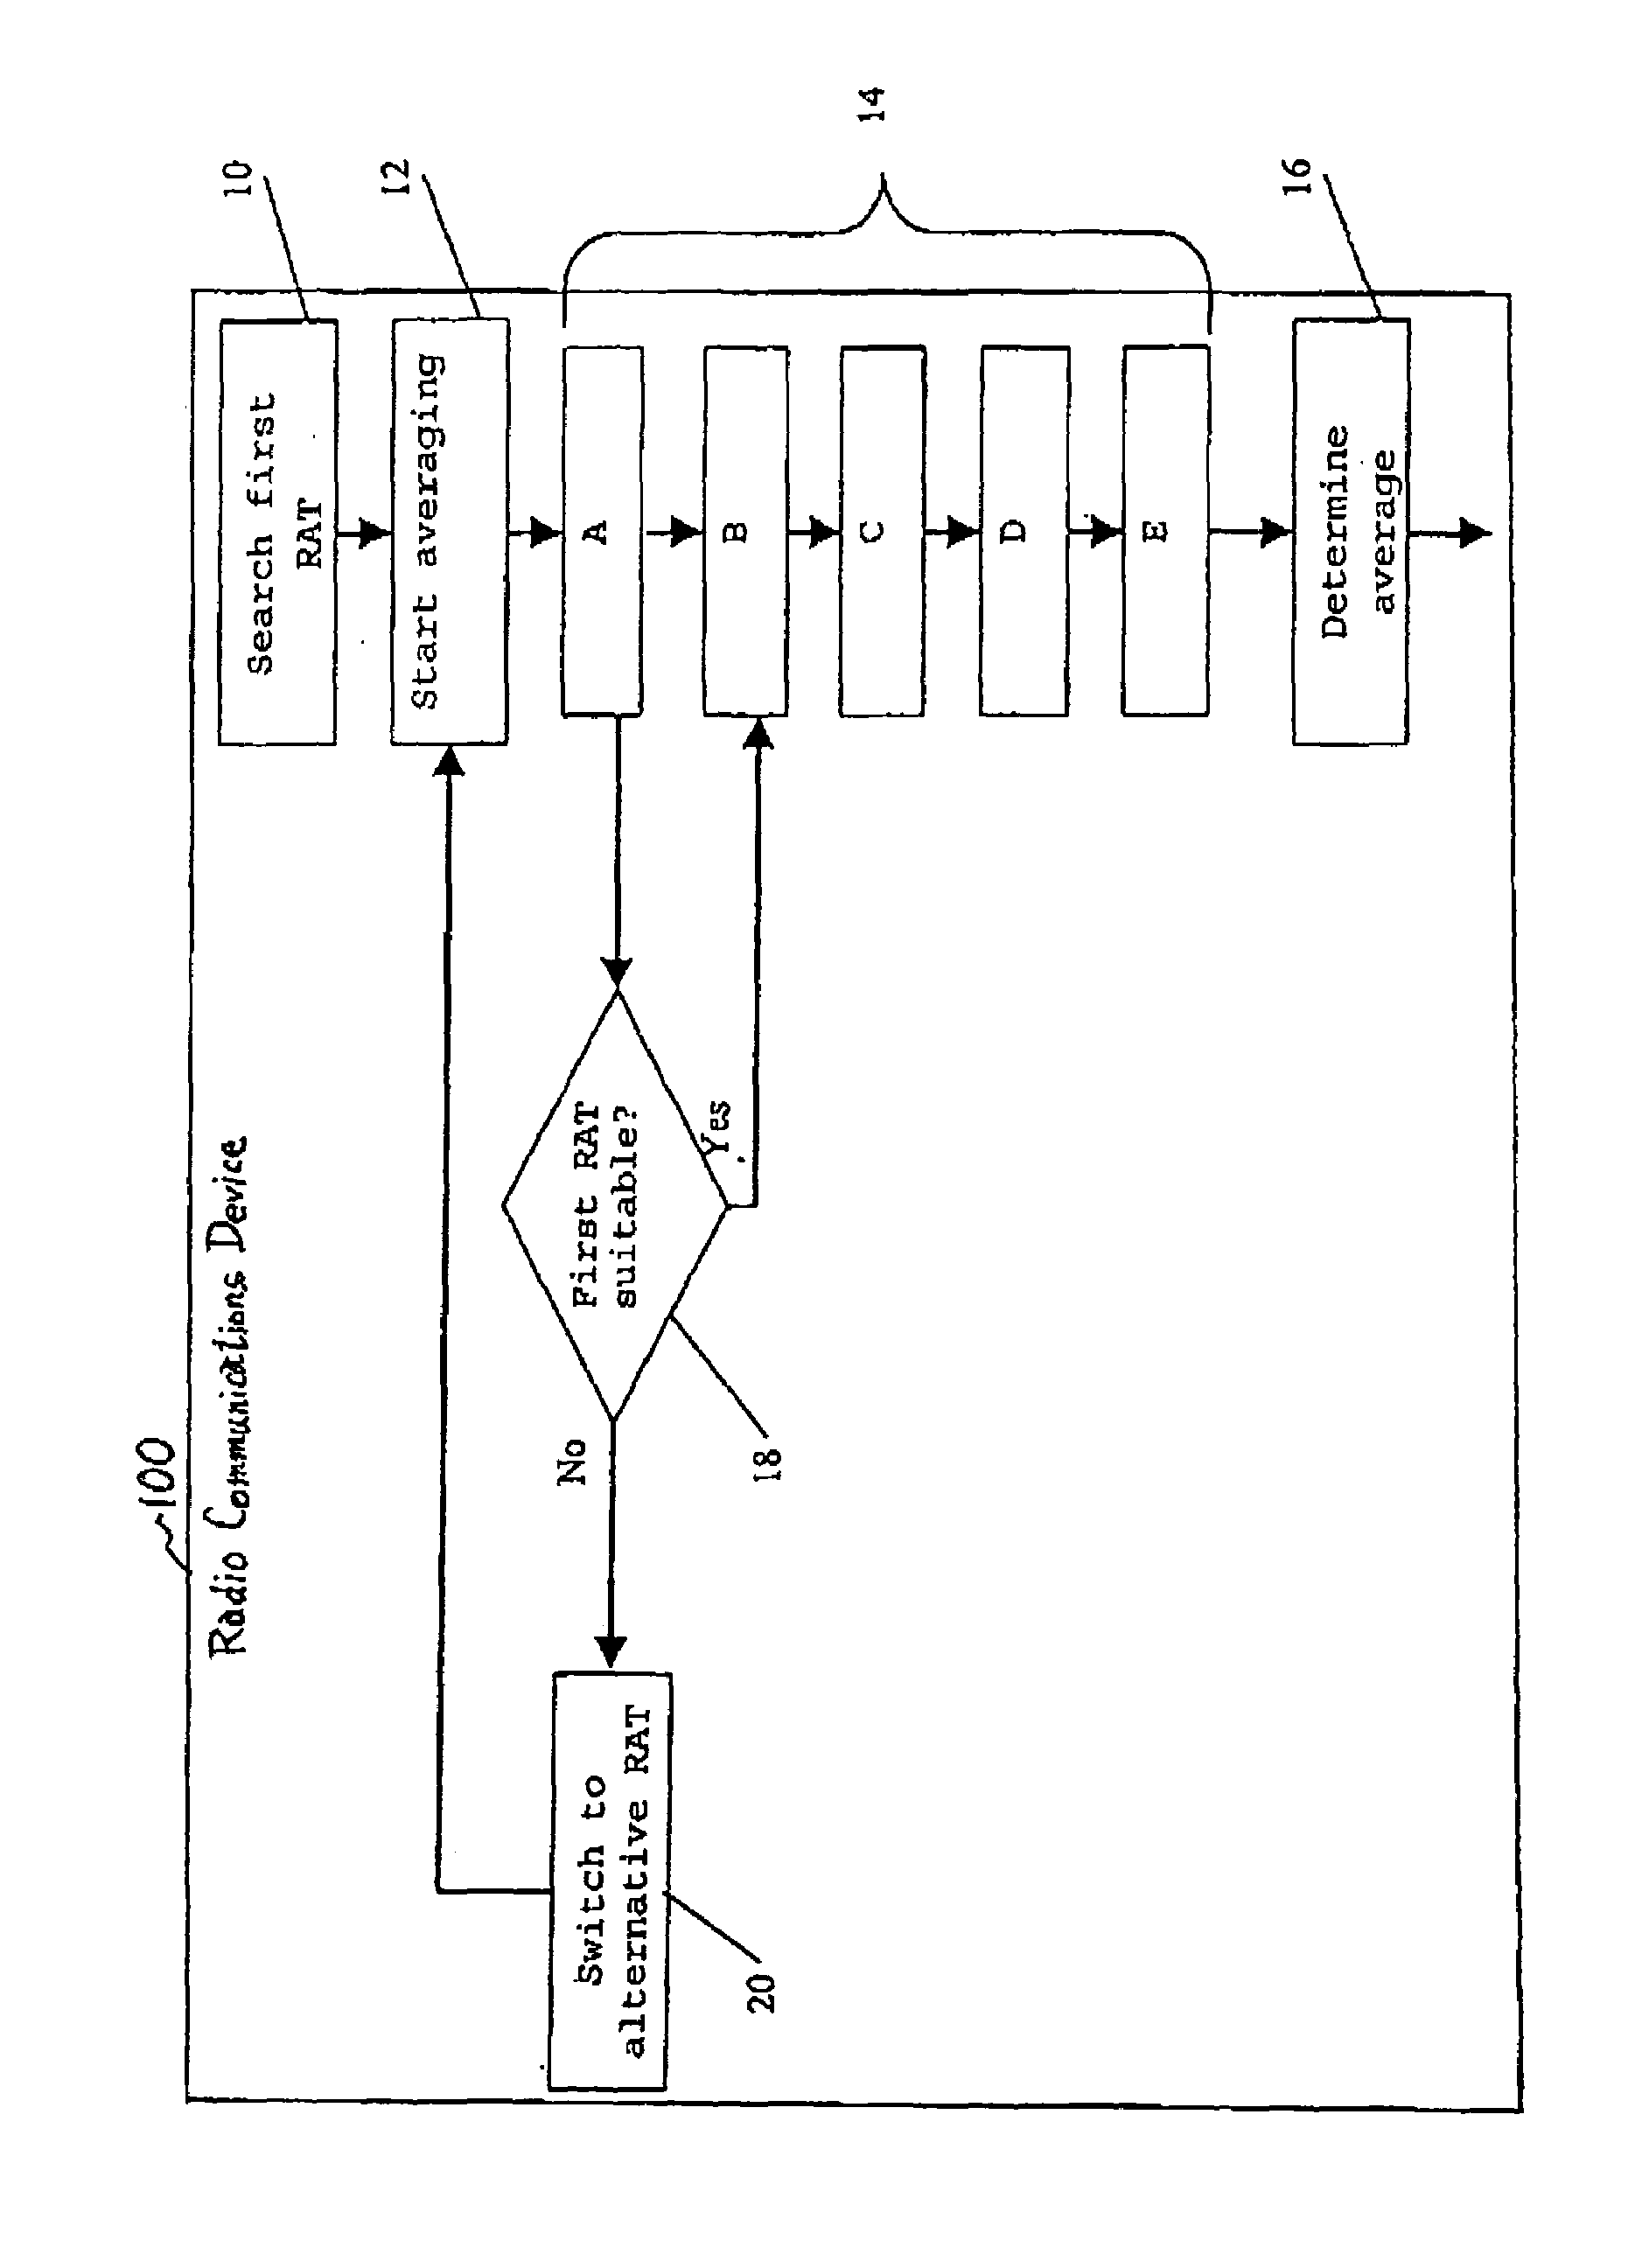 Cellular network acquisition method and apparatus